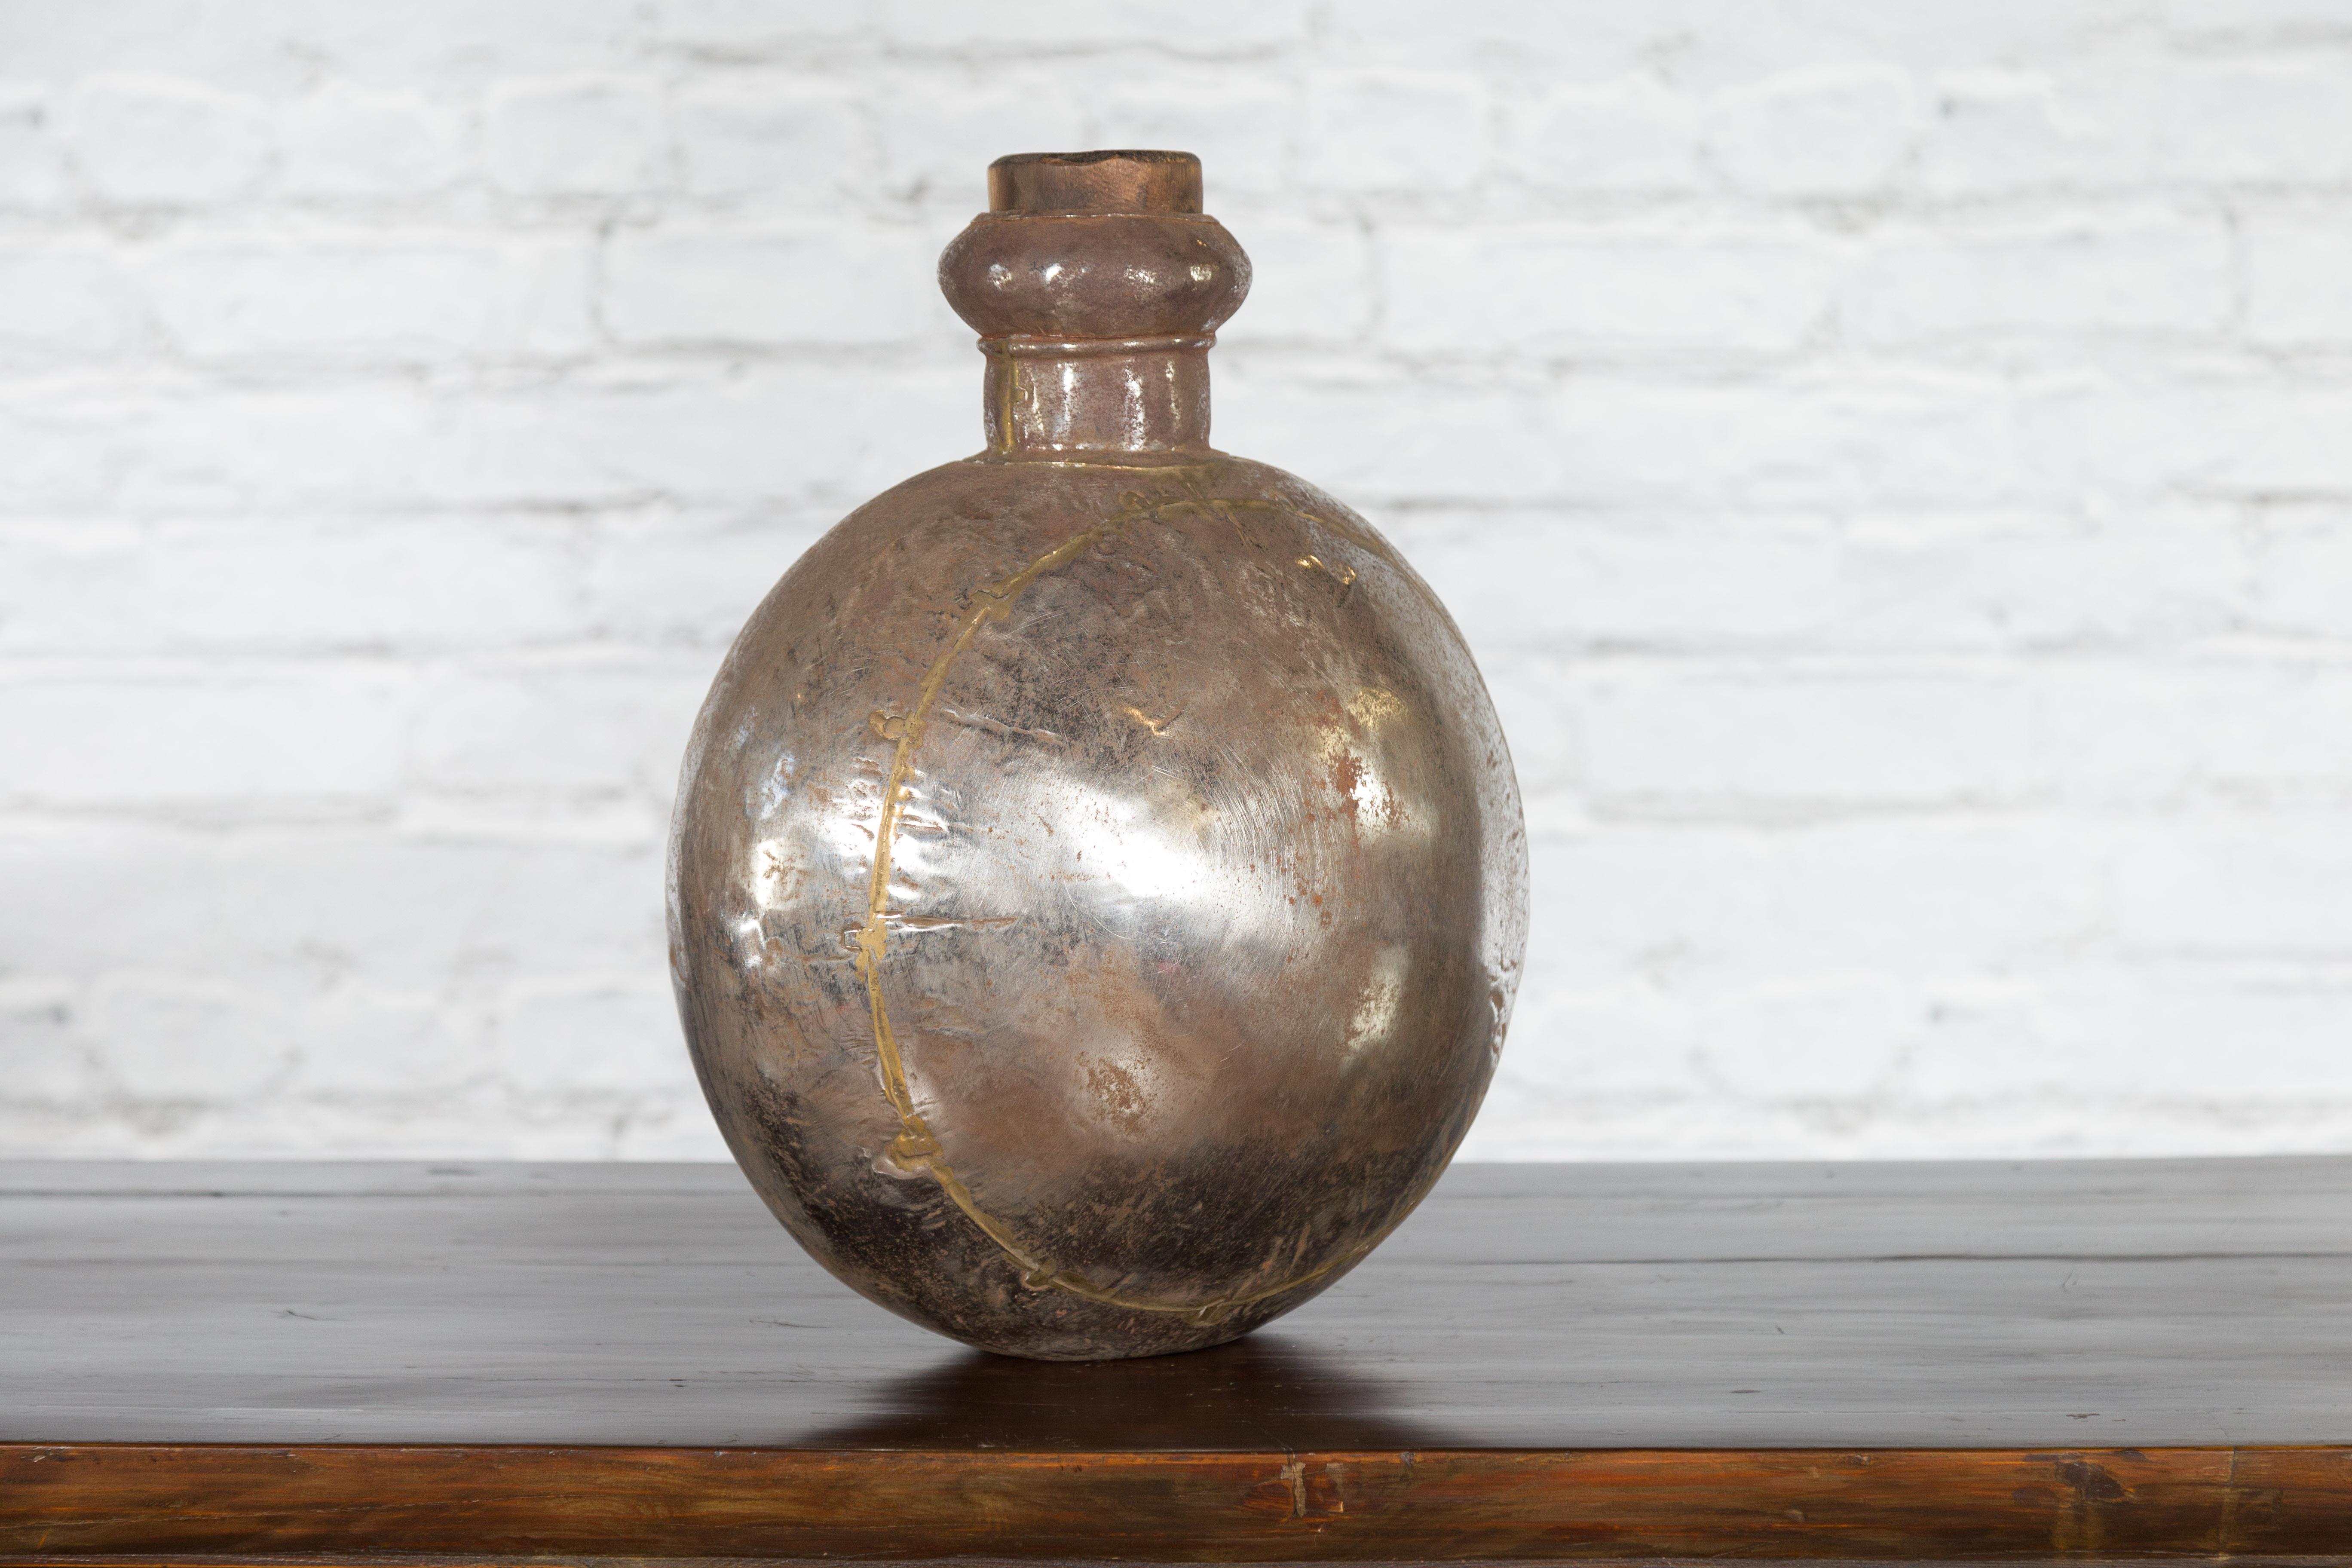 Indian Vintage Metal Water Vase with Cork Style Top and Circular Body For Sale 6